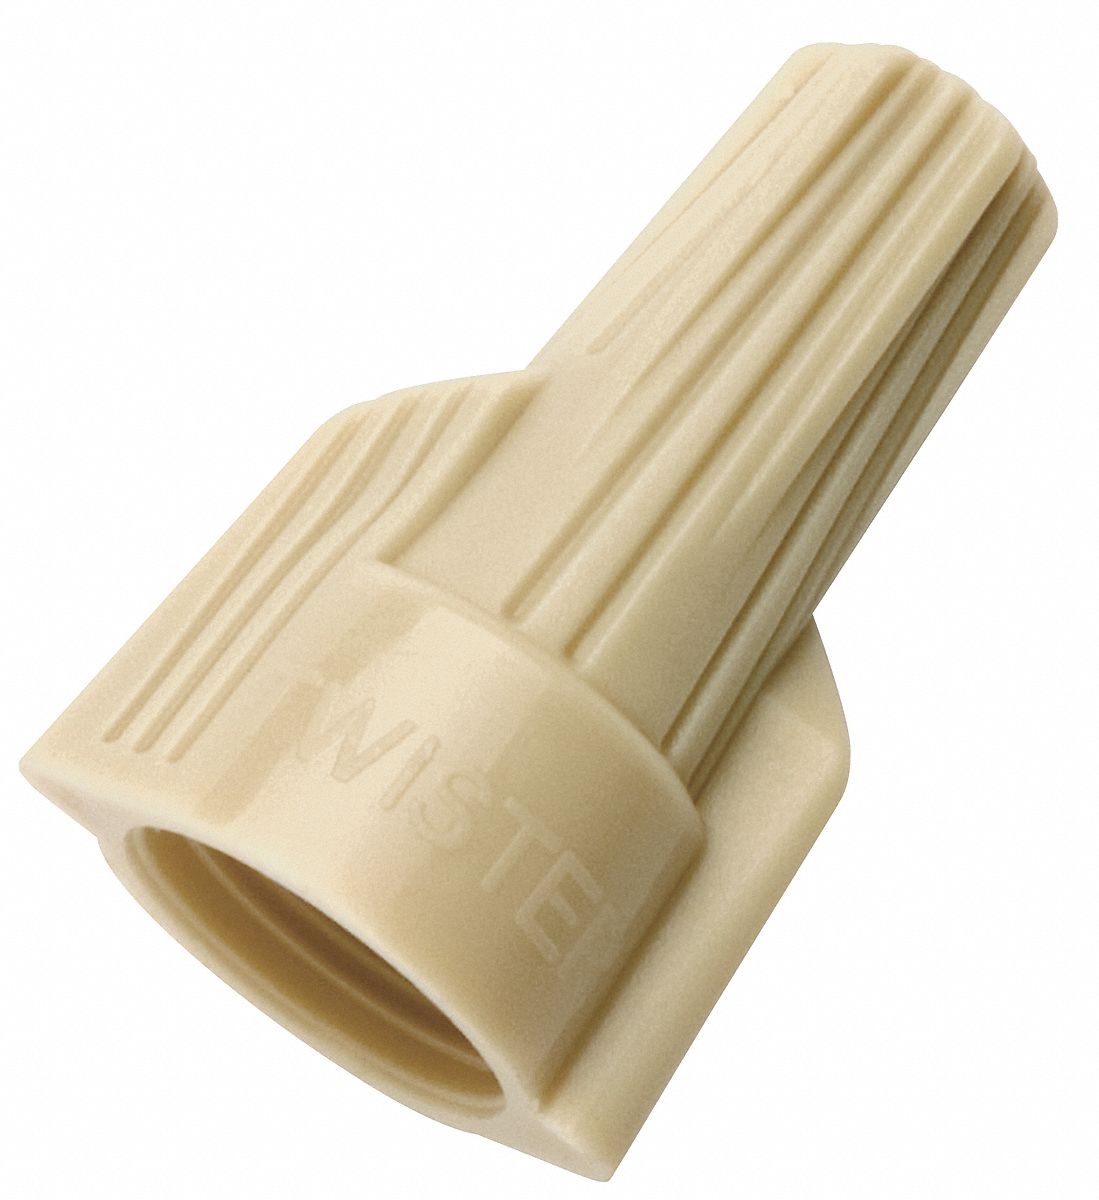 IDEAL Twist On Wire Connector, Tan, 341 Series, Max. Wire Combination: (3) 10 AWG   Twist On Wire Connectors   10K058|30 441J